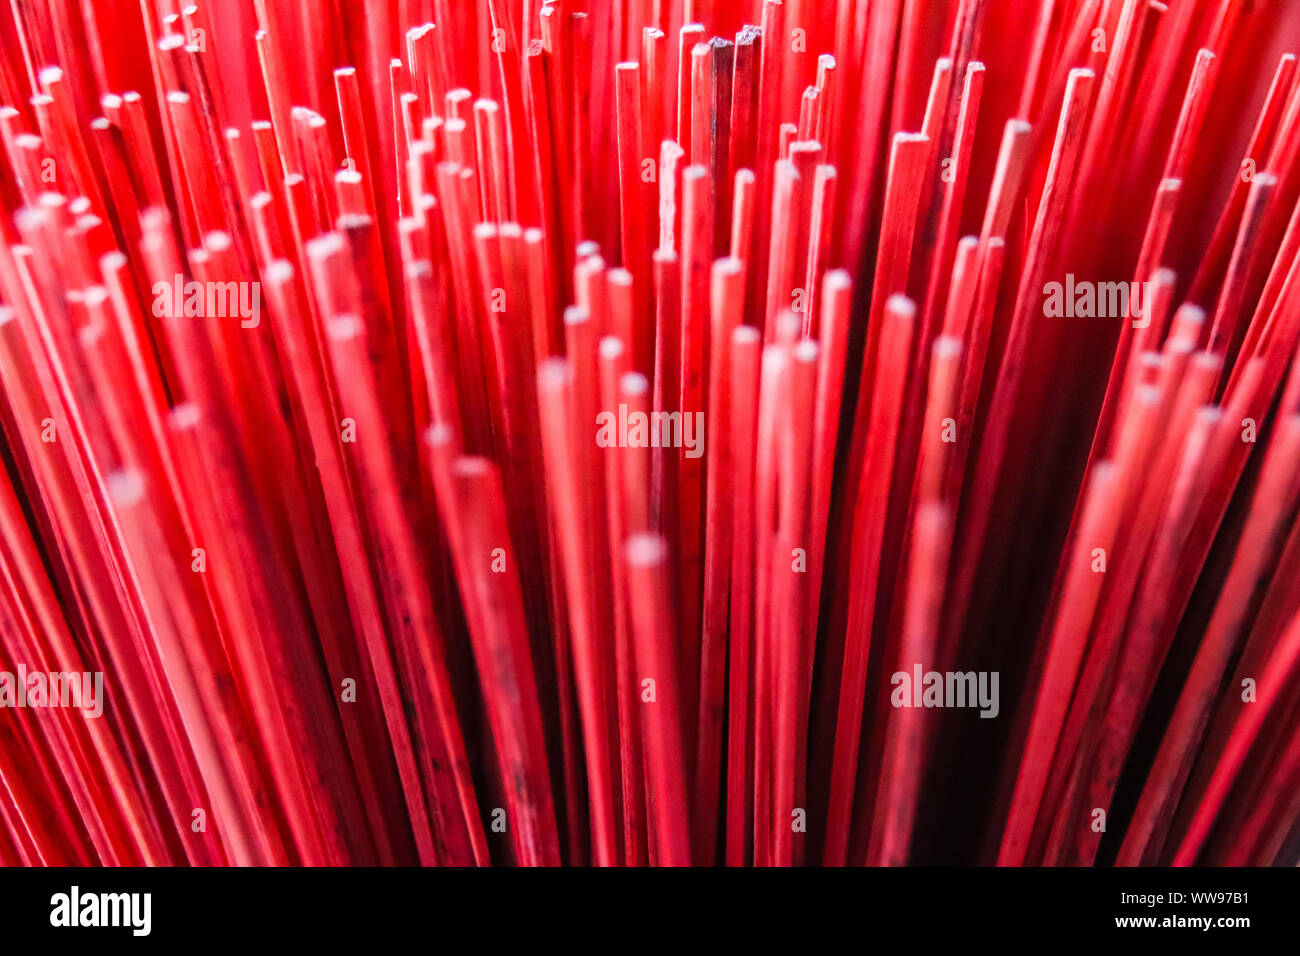 Close up of the boldly colored hand-crafted incense sticks in the famous Thuy Xuan Incense Village in Hue, Vietnam Stock Photo